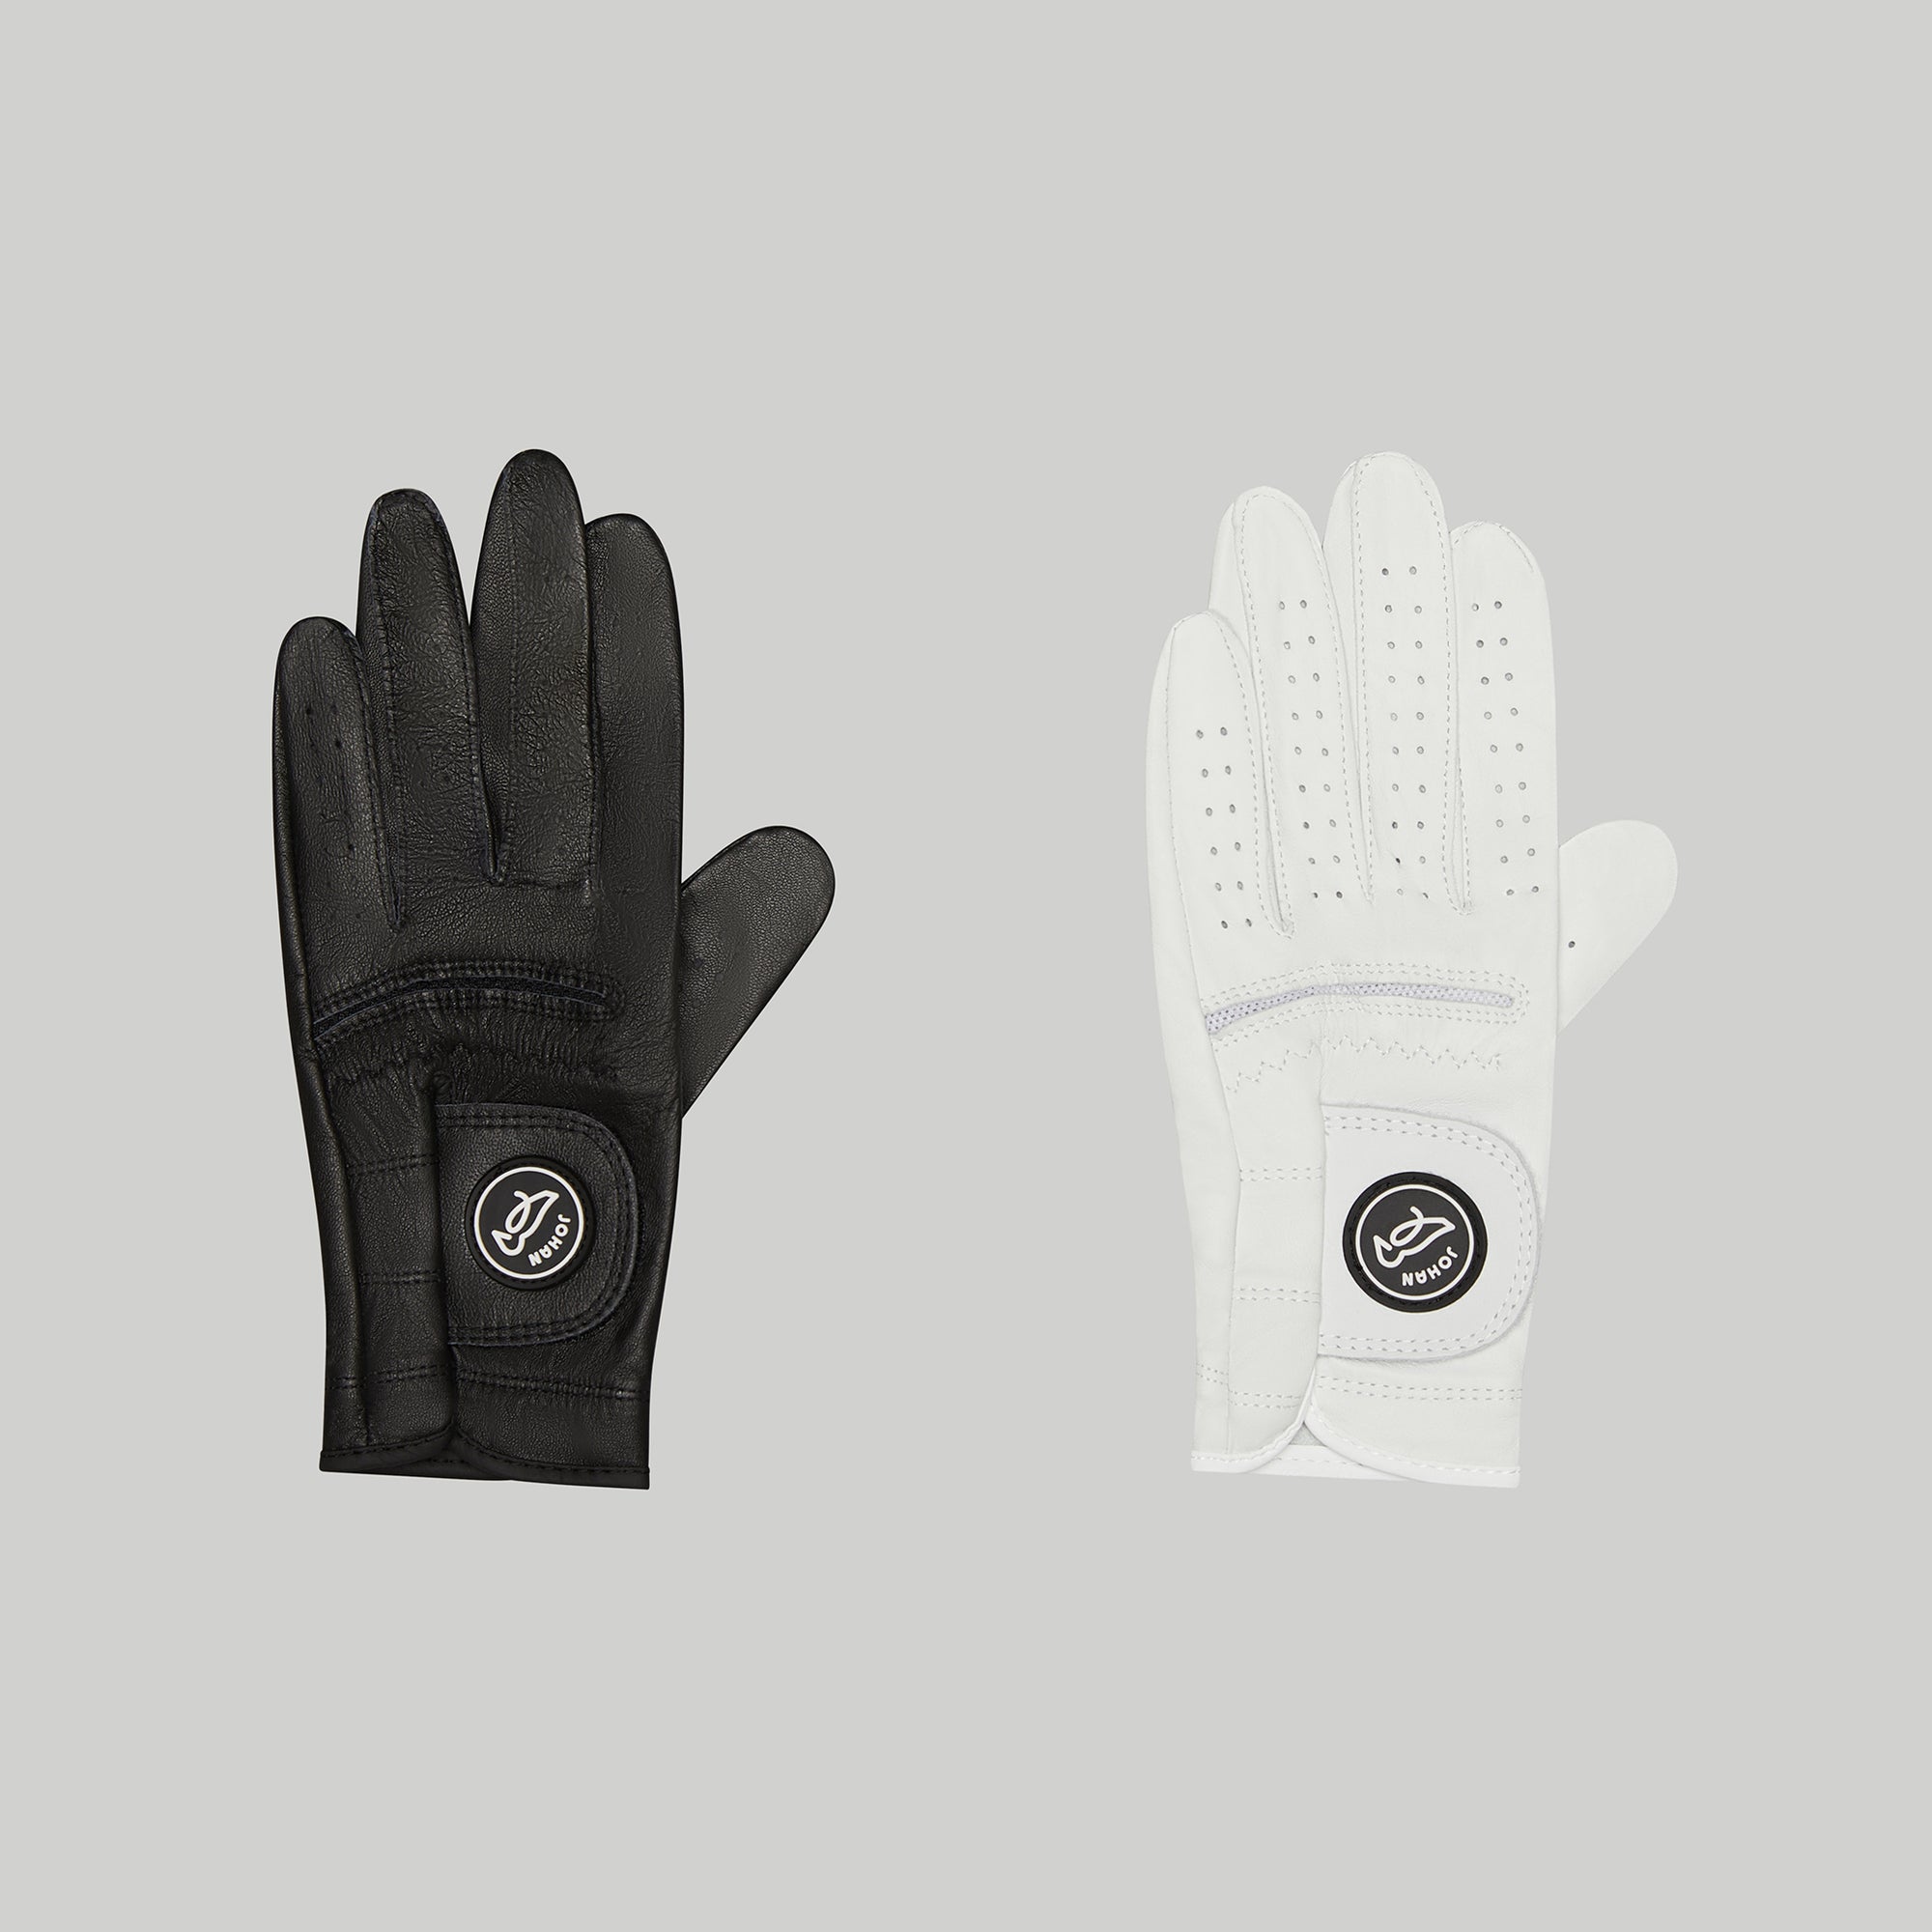 Cabretta Leather Gloves for Golf & Lifestyle by Johan